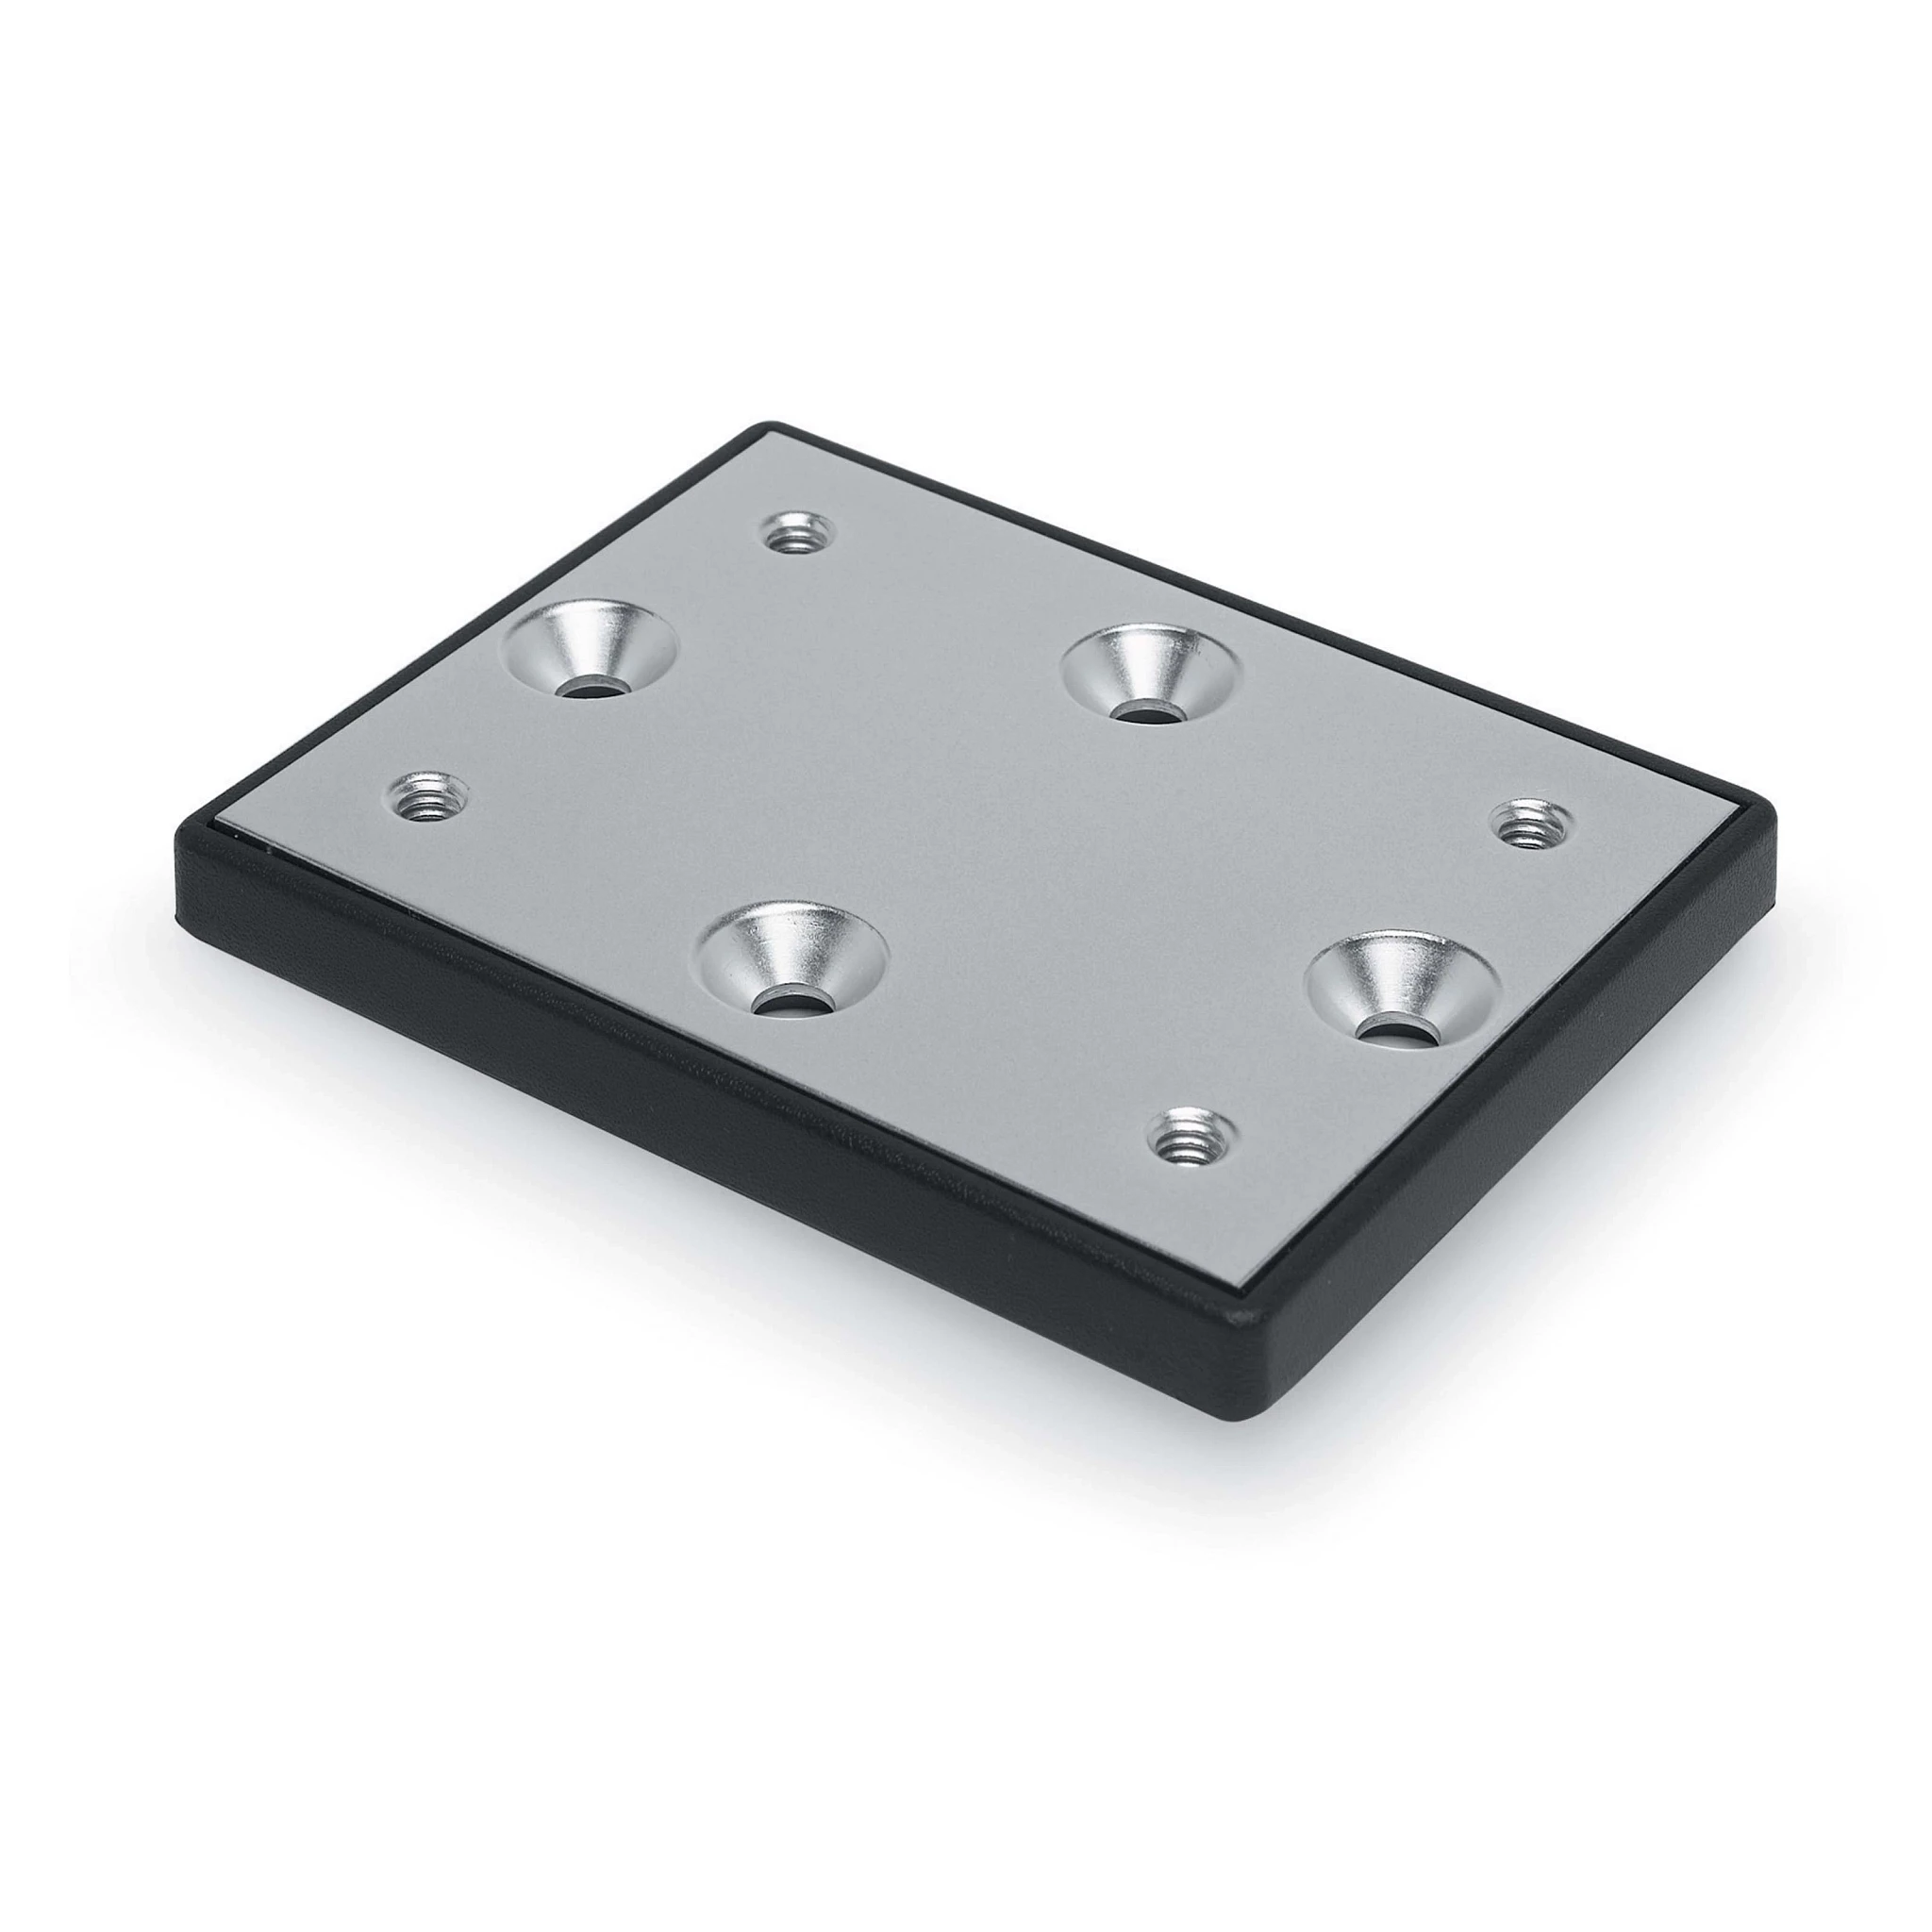 Metal mounting plate with black boot